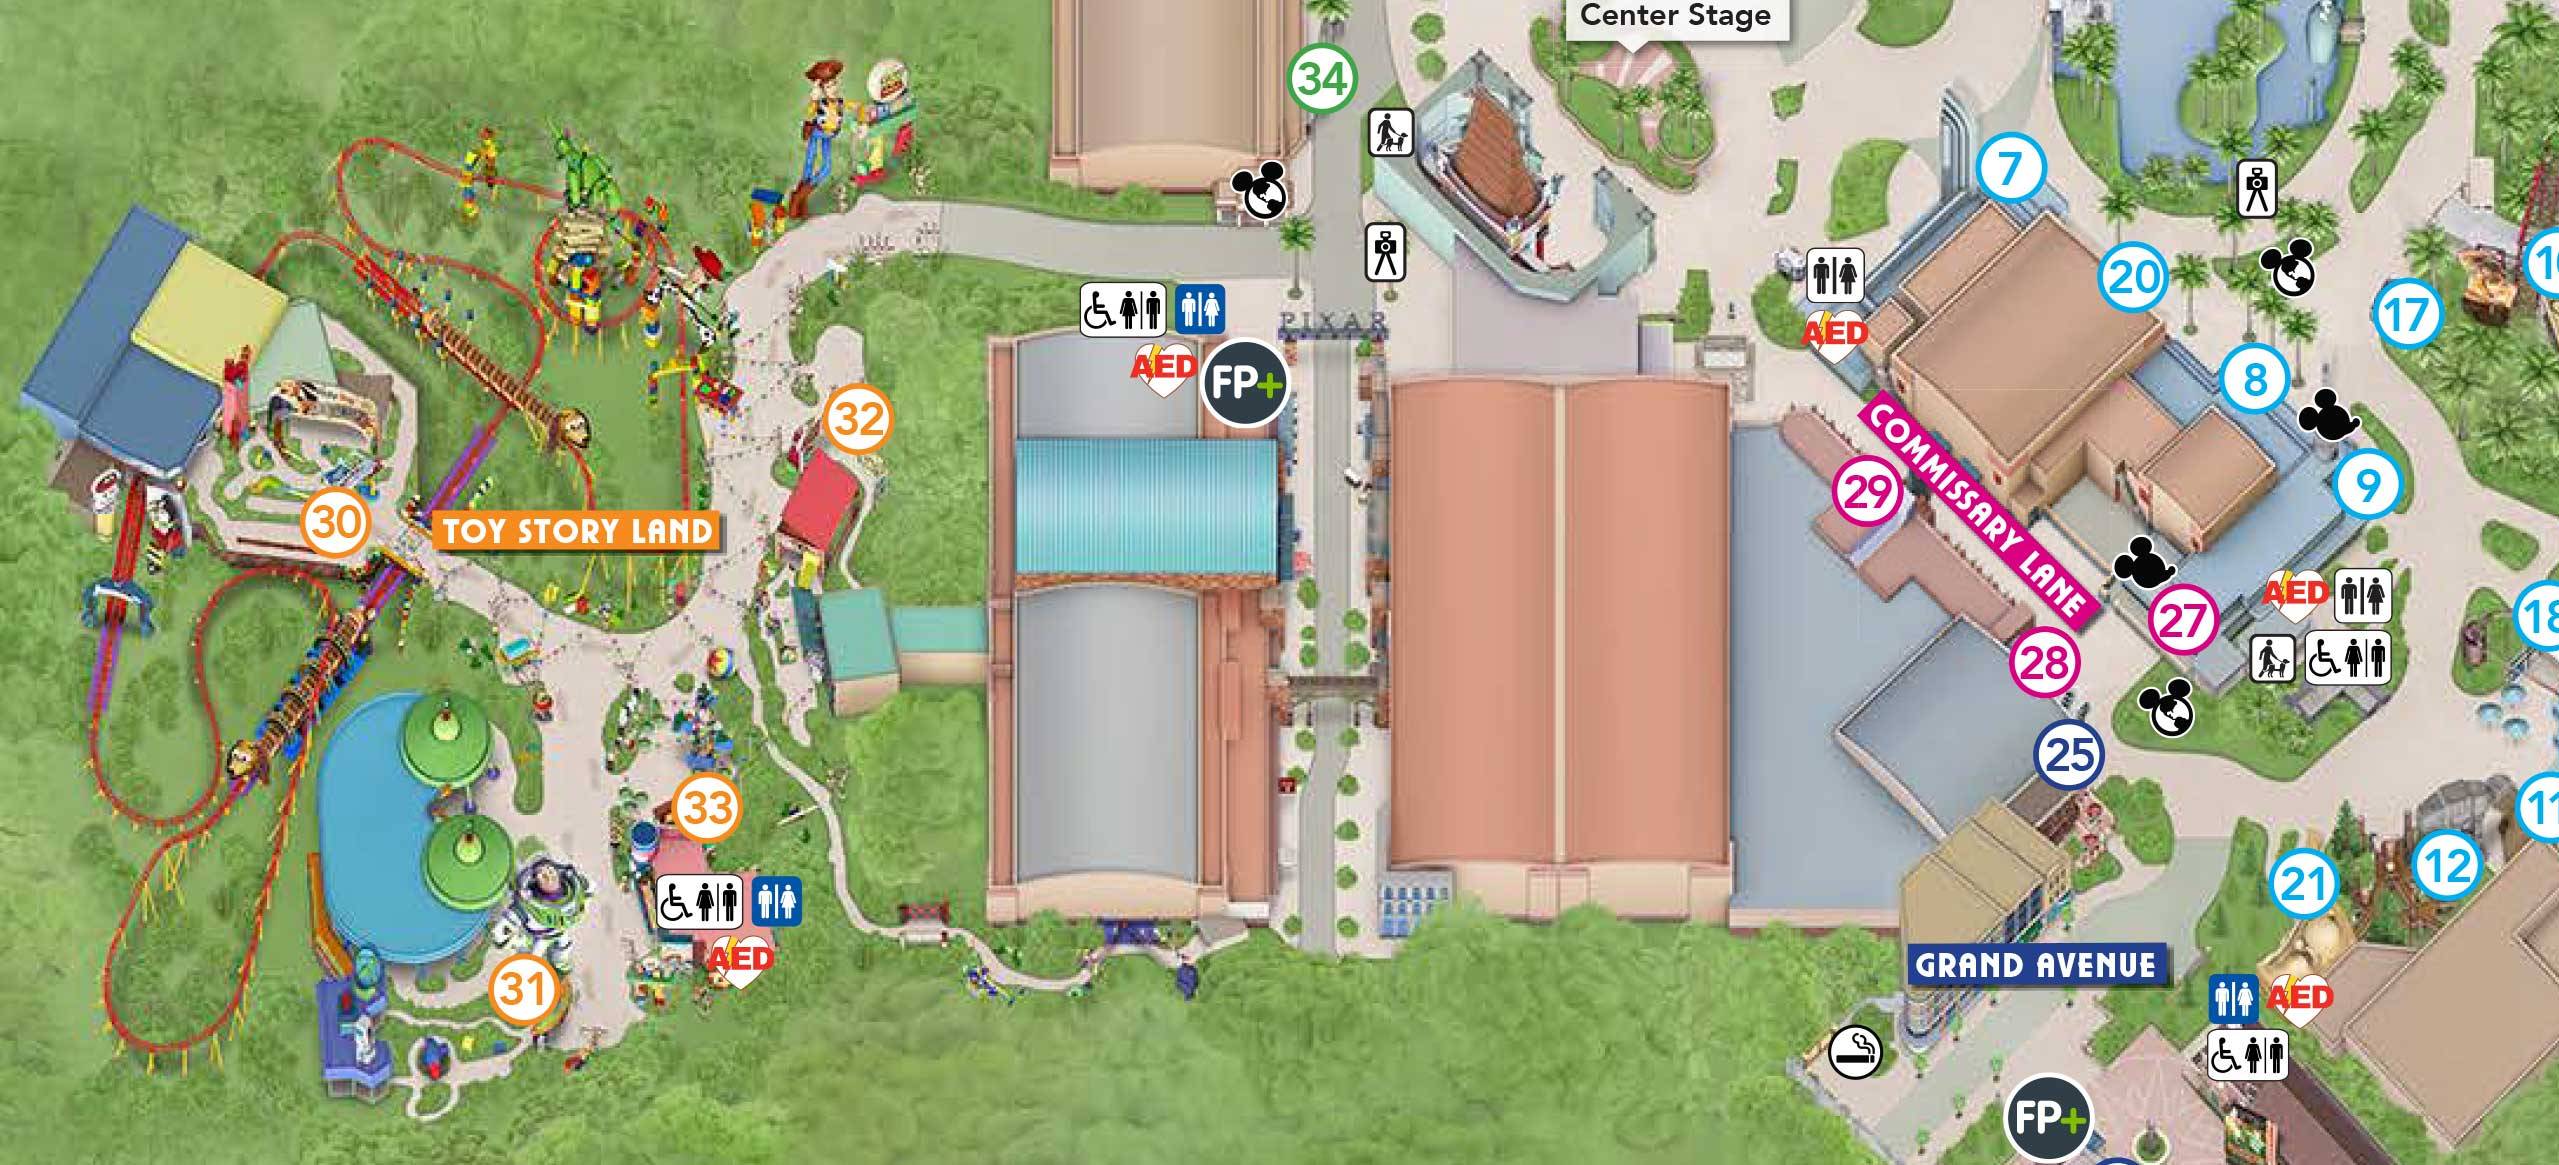 PHOTOS - New Guide Map for Disney's Hollywood Studios